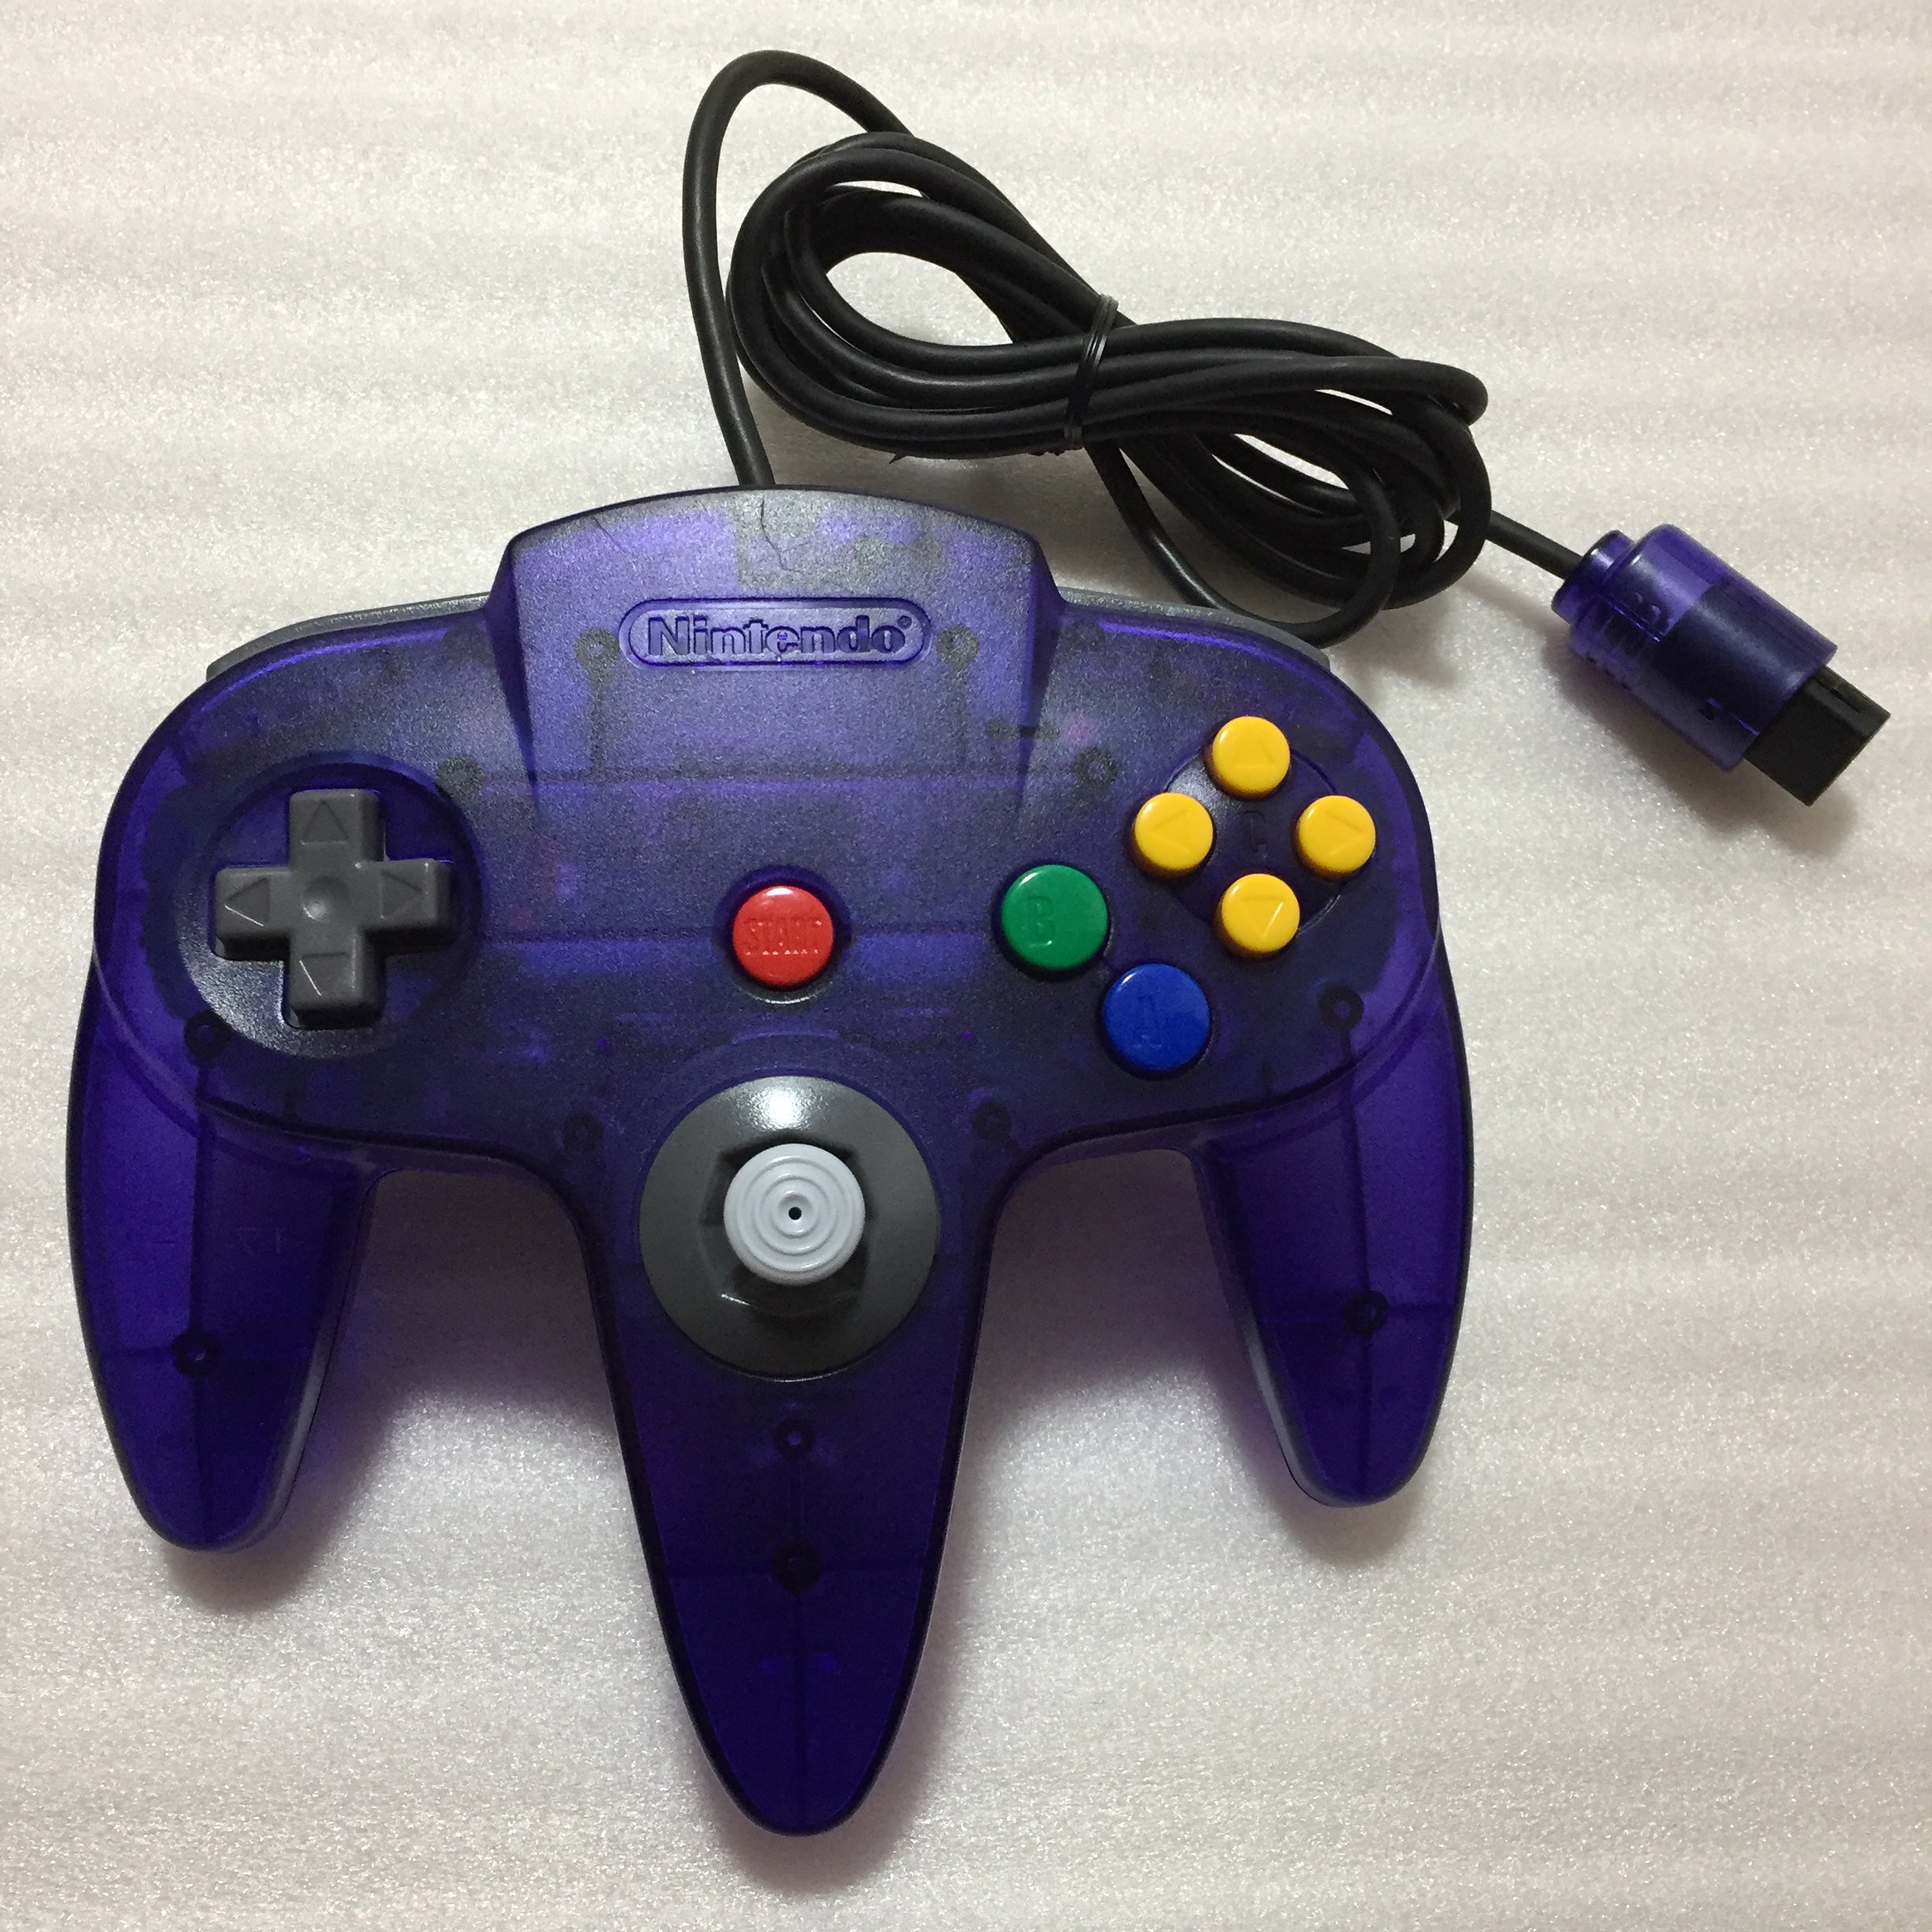 Clear Purple Nintendo 64 set with ULTRA HDMI kit - compatible with JP ...